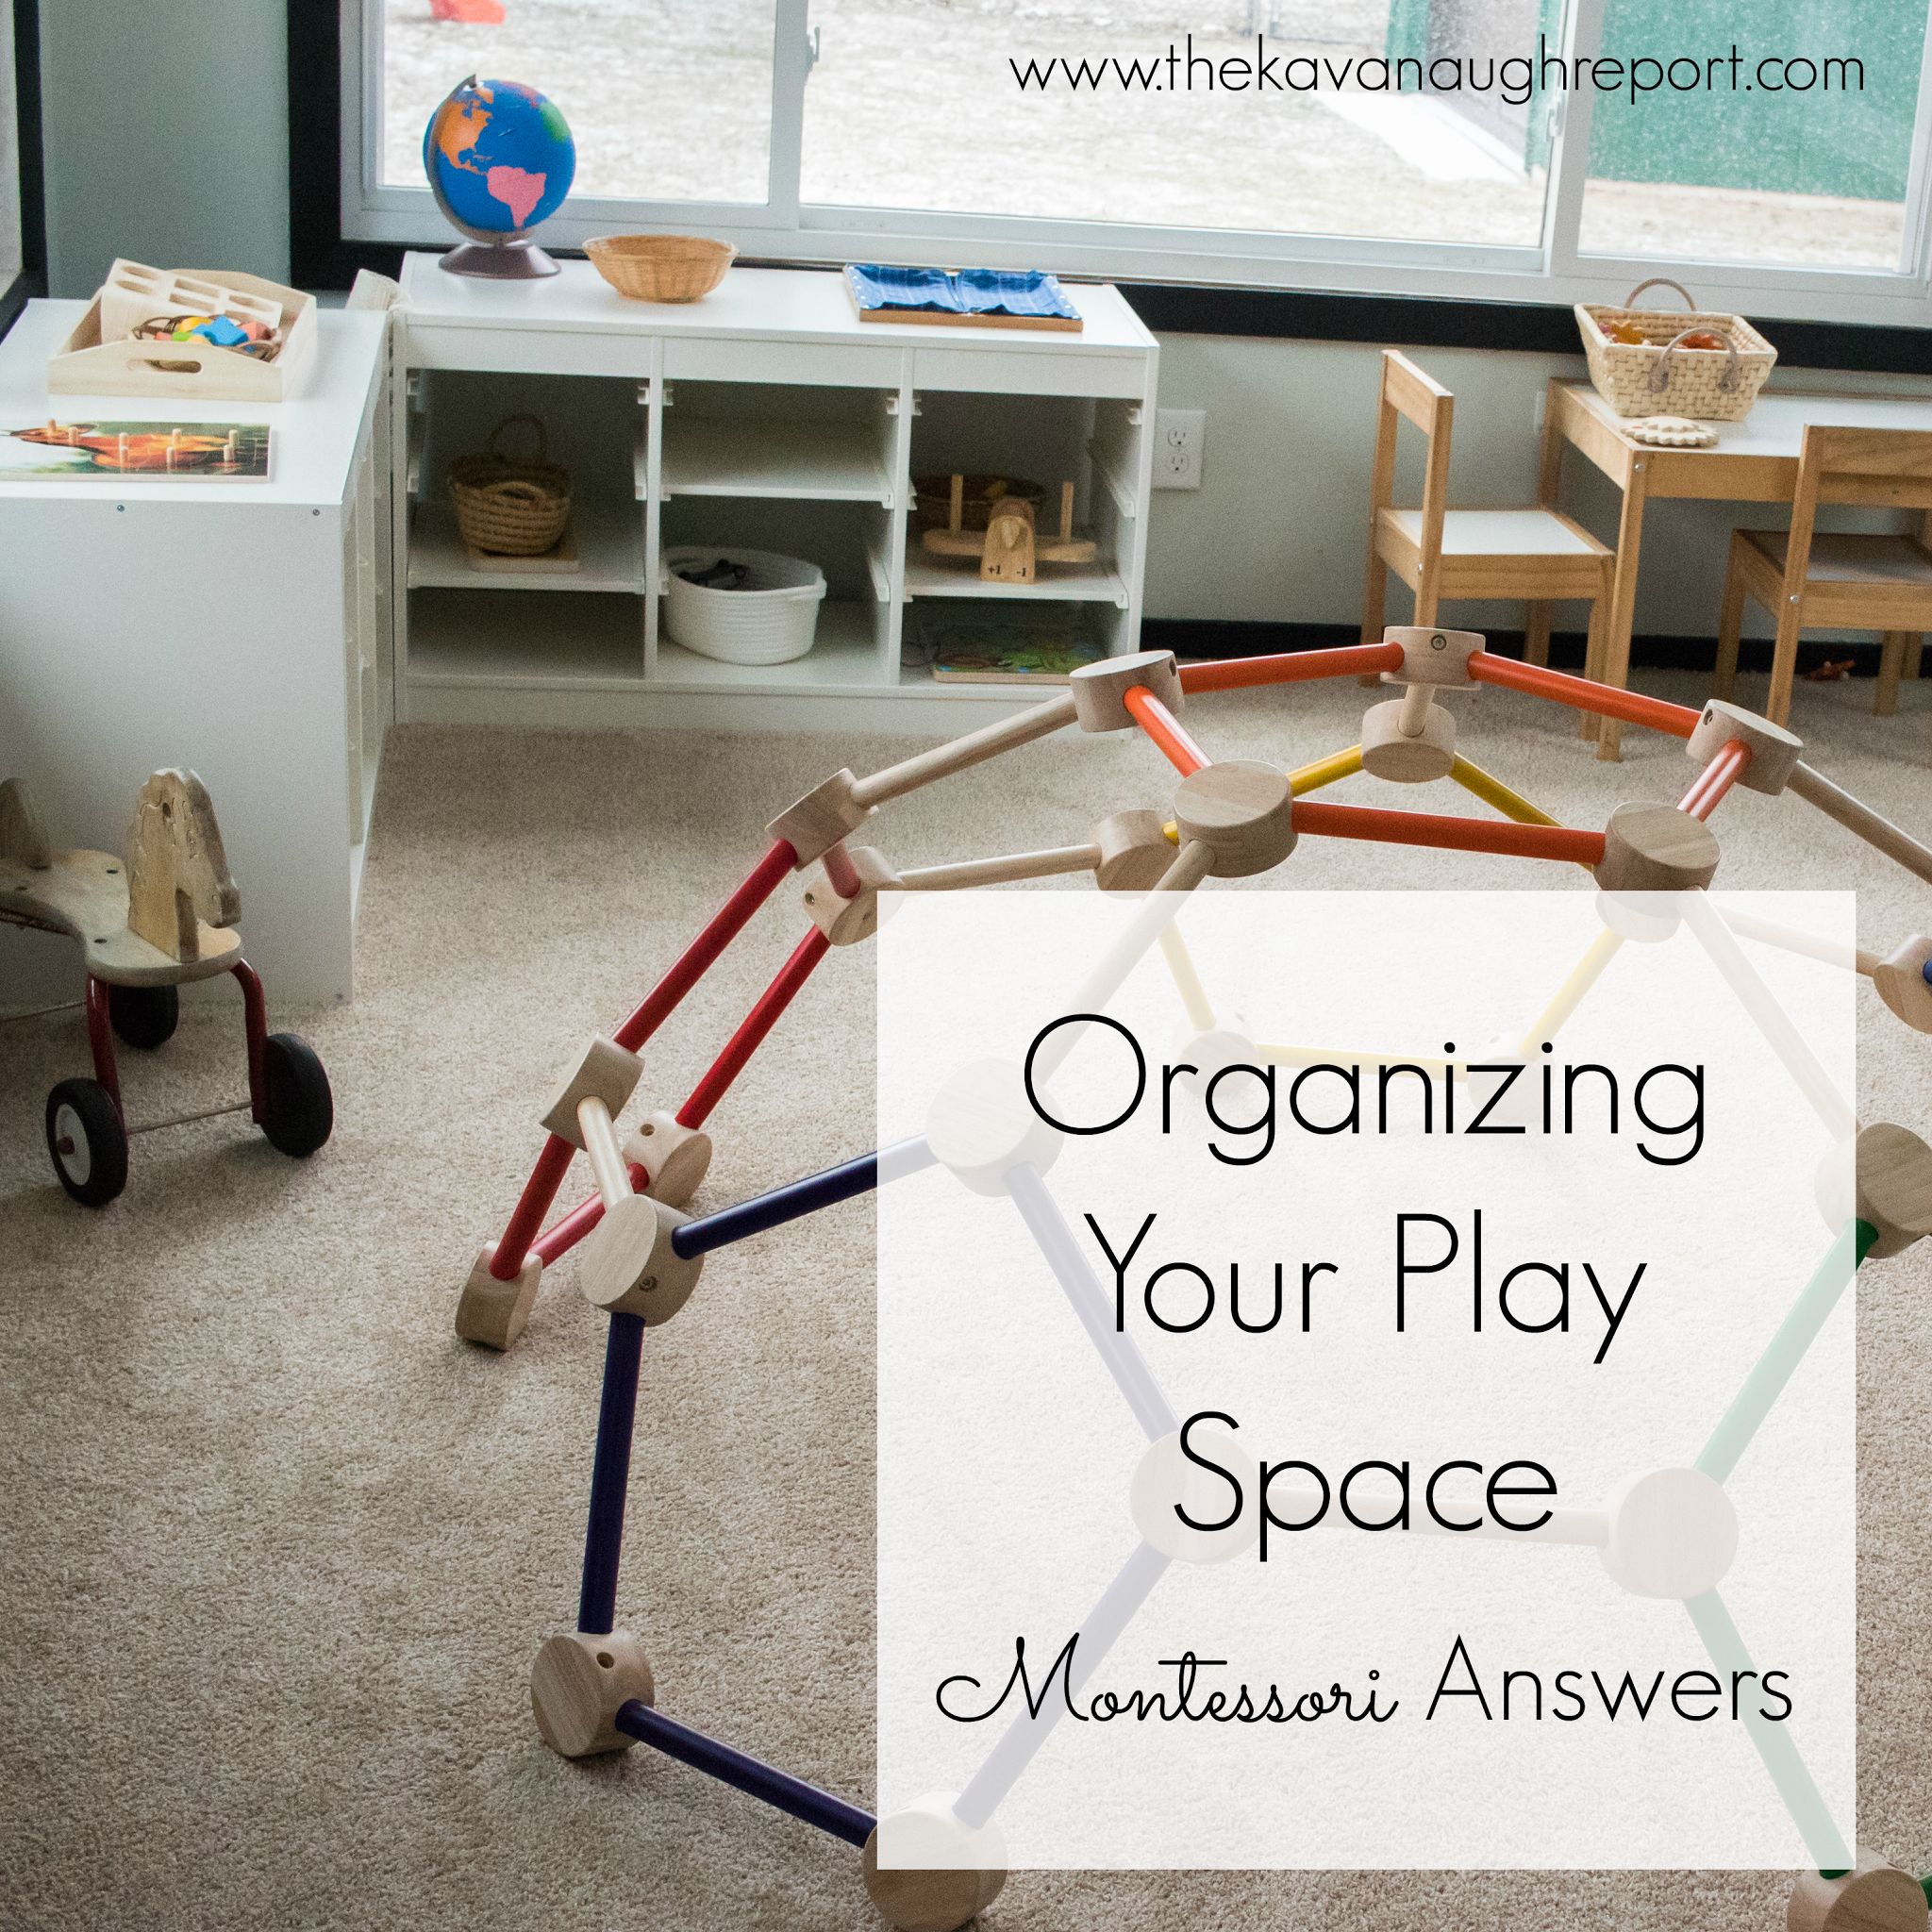 Ideas and tips for organizing your Montessori playroom. Here are some thoughts on how to make your play space accessible and organized for children.